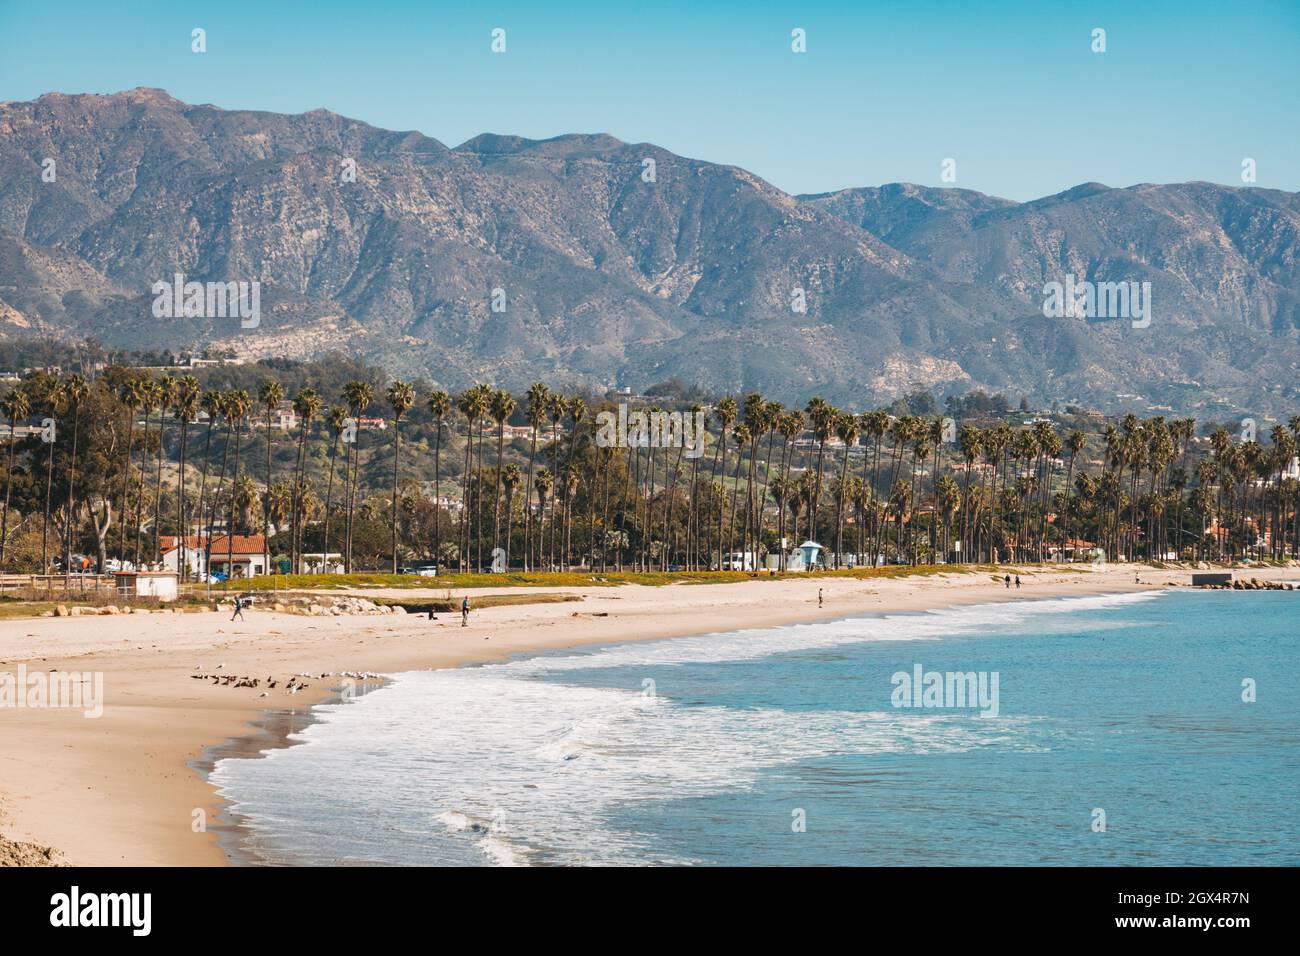 East Beach in Santa Barbara, CA. Lined by palm trees and with sweeping views of the Pacific Ocean and Santa Ynez mountains Stock Photo